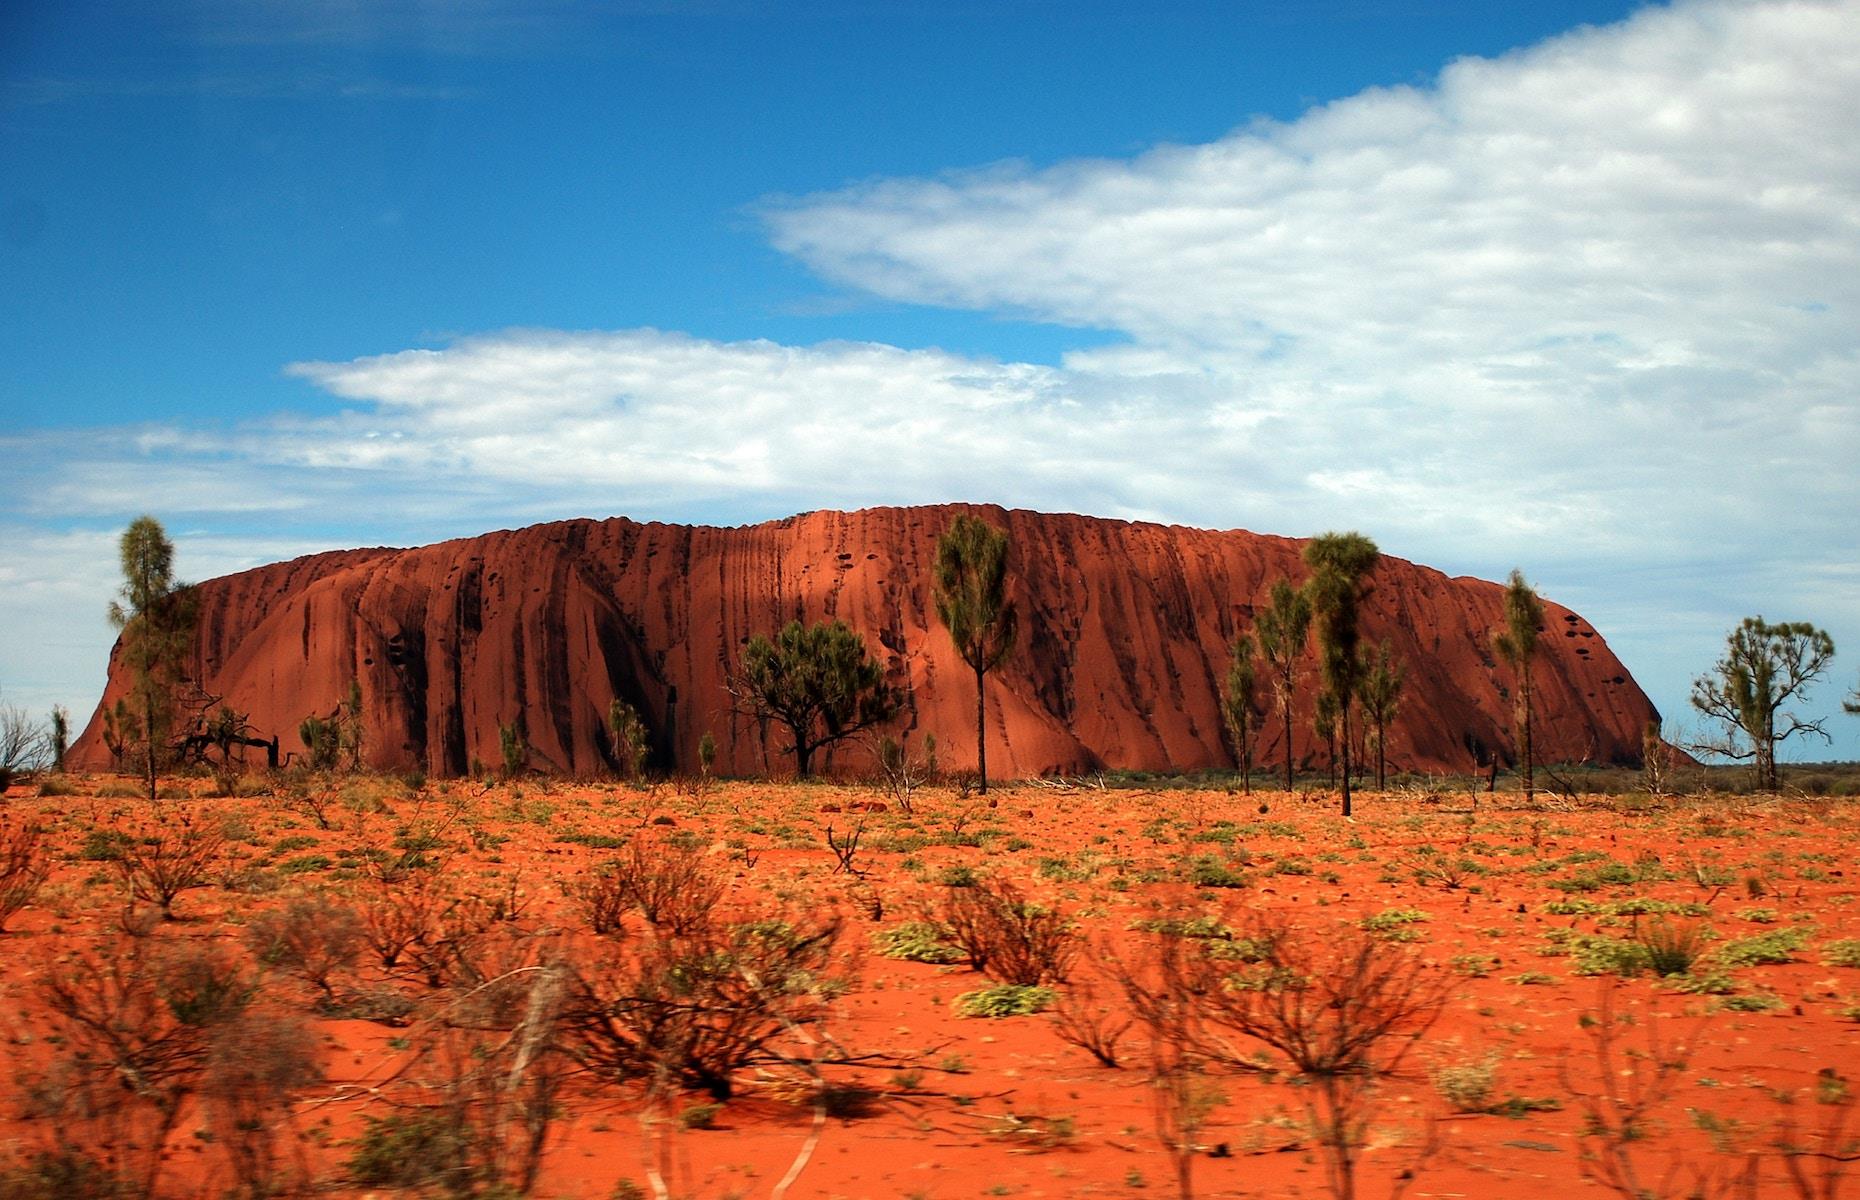 The imposing beauty and spiritual significance of this mammoth monolith, which thrusts out of the red dirt in the desolate center of Australia, is unnerving. Surrounded by the Red Centre's untamed wilderness as far as the eye can see, there's something truly primeval about the ancient sandstone boulder. It's a hugely sacred site for the Anangu people – the custodians of the land – and one of the greatest natural wonders of the world.